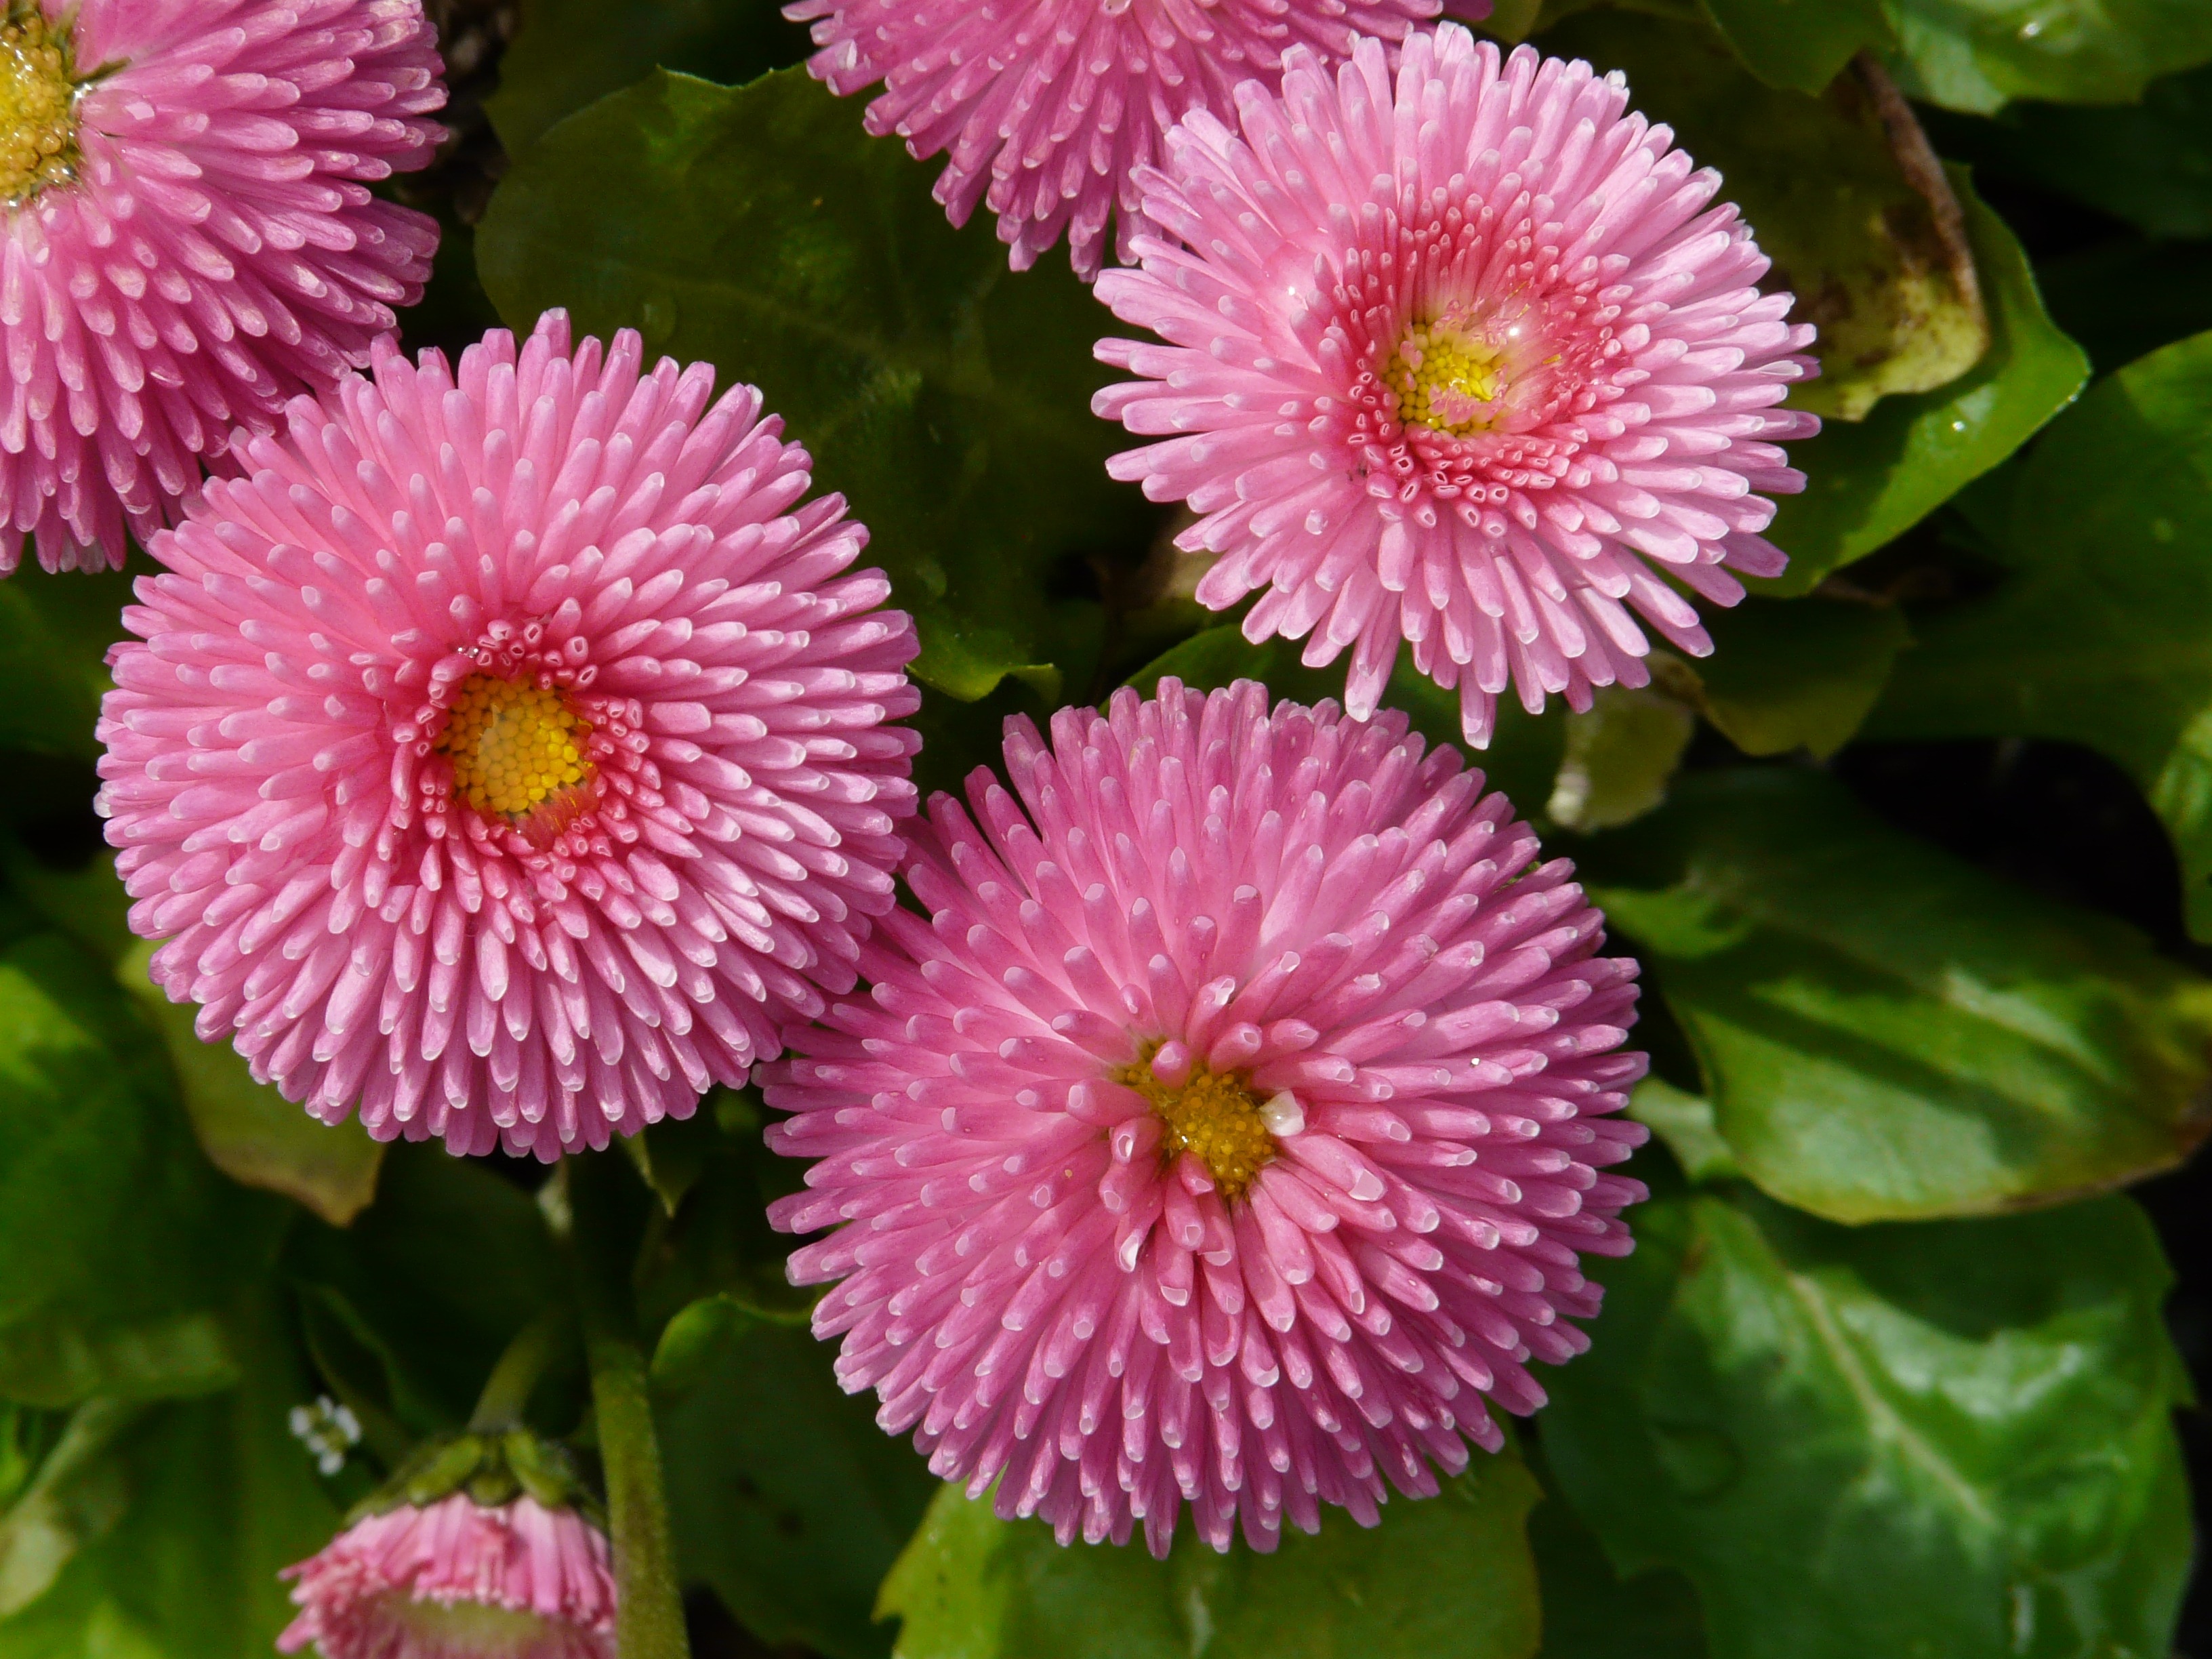 Pink fluffy flowers among green leaves free image